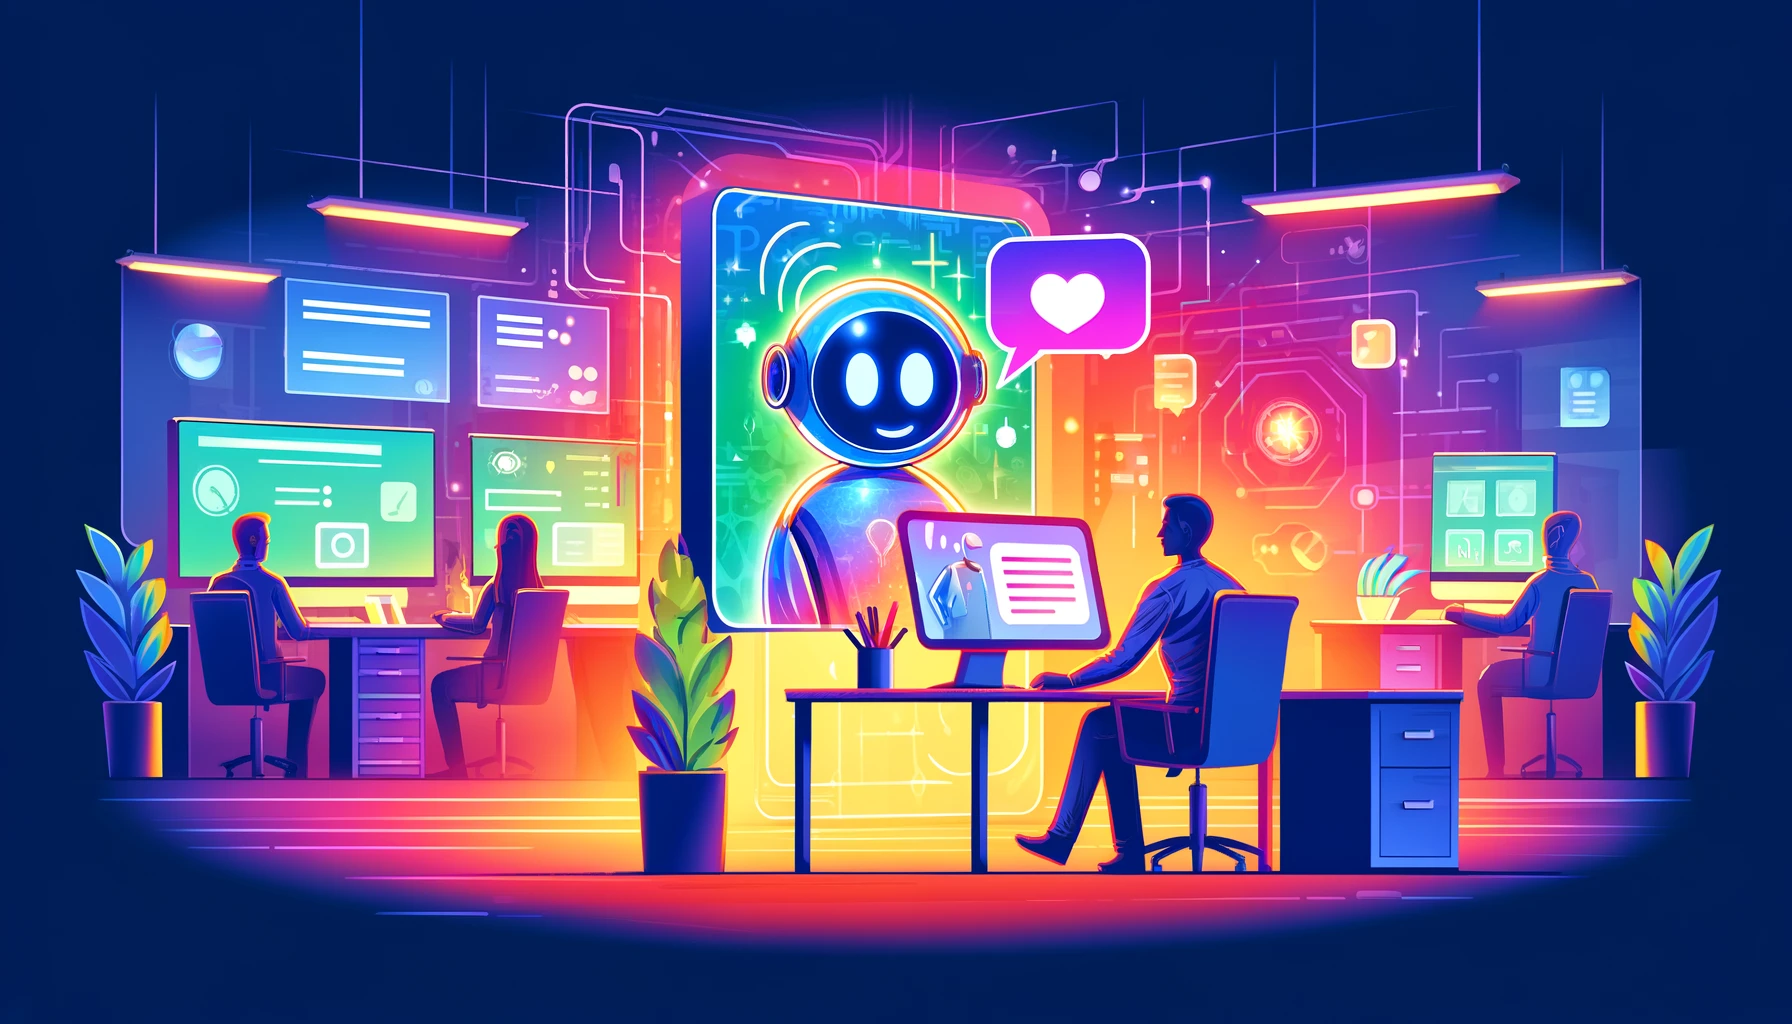 A colorful illustration depicting a tech-forward customer service scenario in a modern support center. The scene shows a customer interacting with an advanced chatbot on a computer screen, which displays a friendly AI interface. The setting is cozy yet modern, equipped with high-tech gear and ambient lighting. The style is vibrant and slightly abstract, emphasizing how artificial intelligence seamlessly integrates into customer support, enhancing efficiency and loyalty.